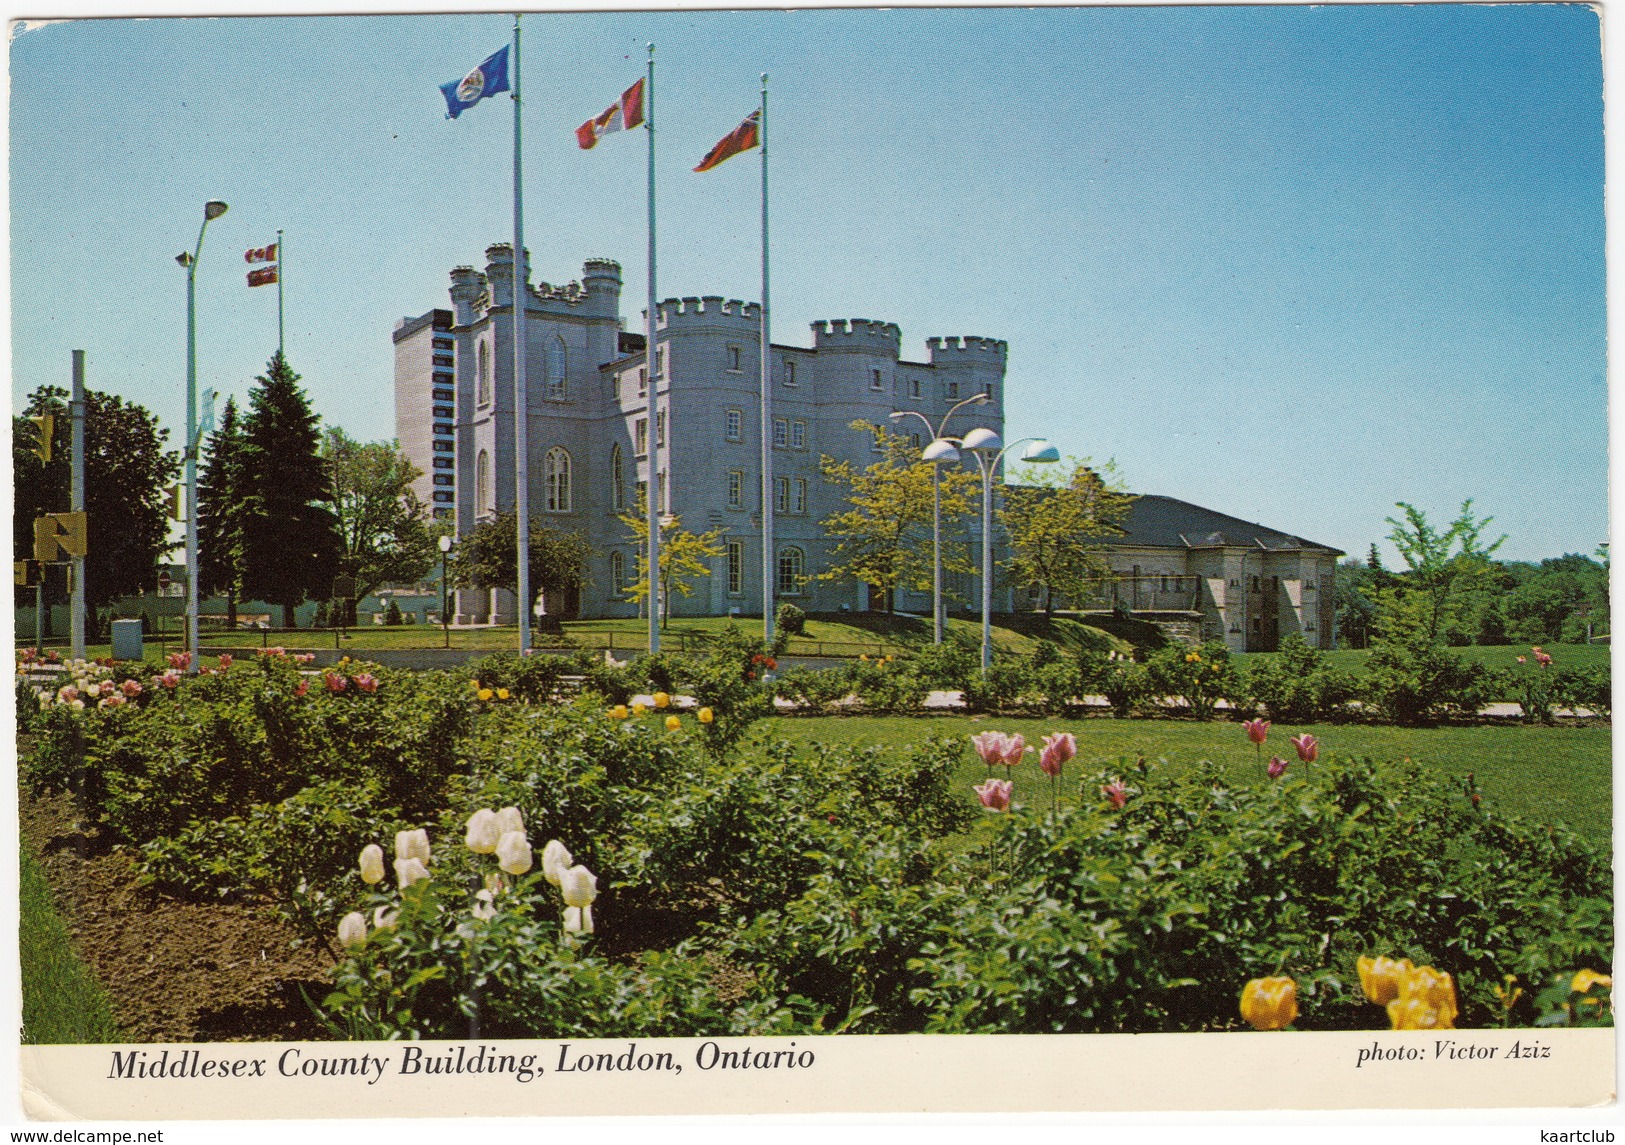 Middlesex County Building - London, Ontario, Canada - Londen